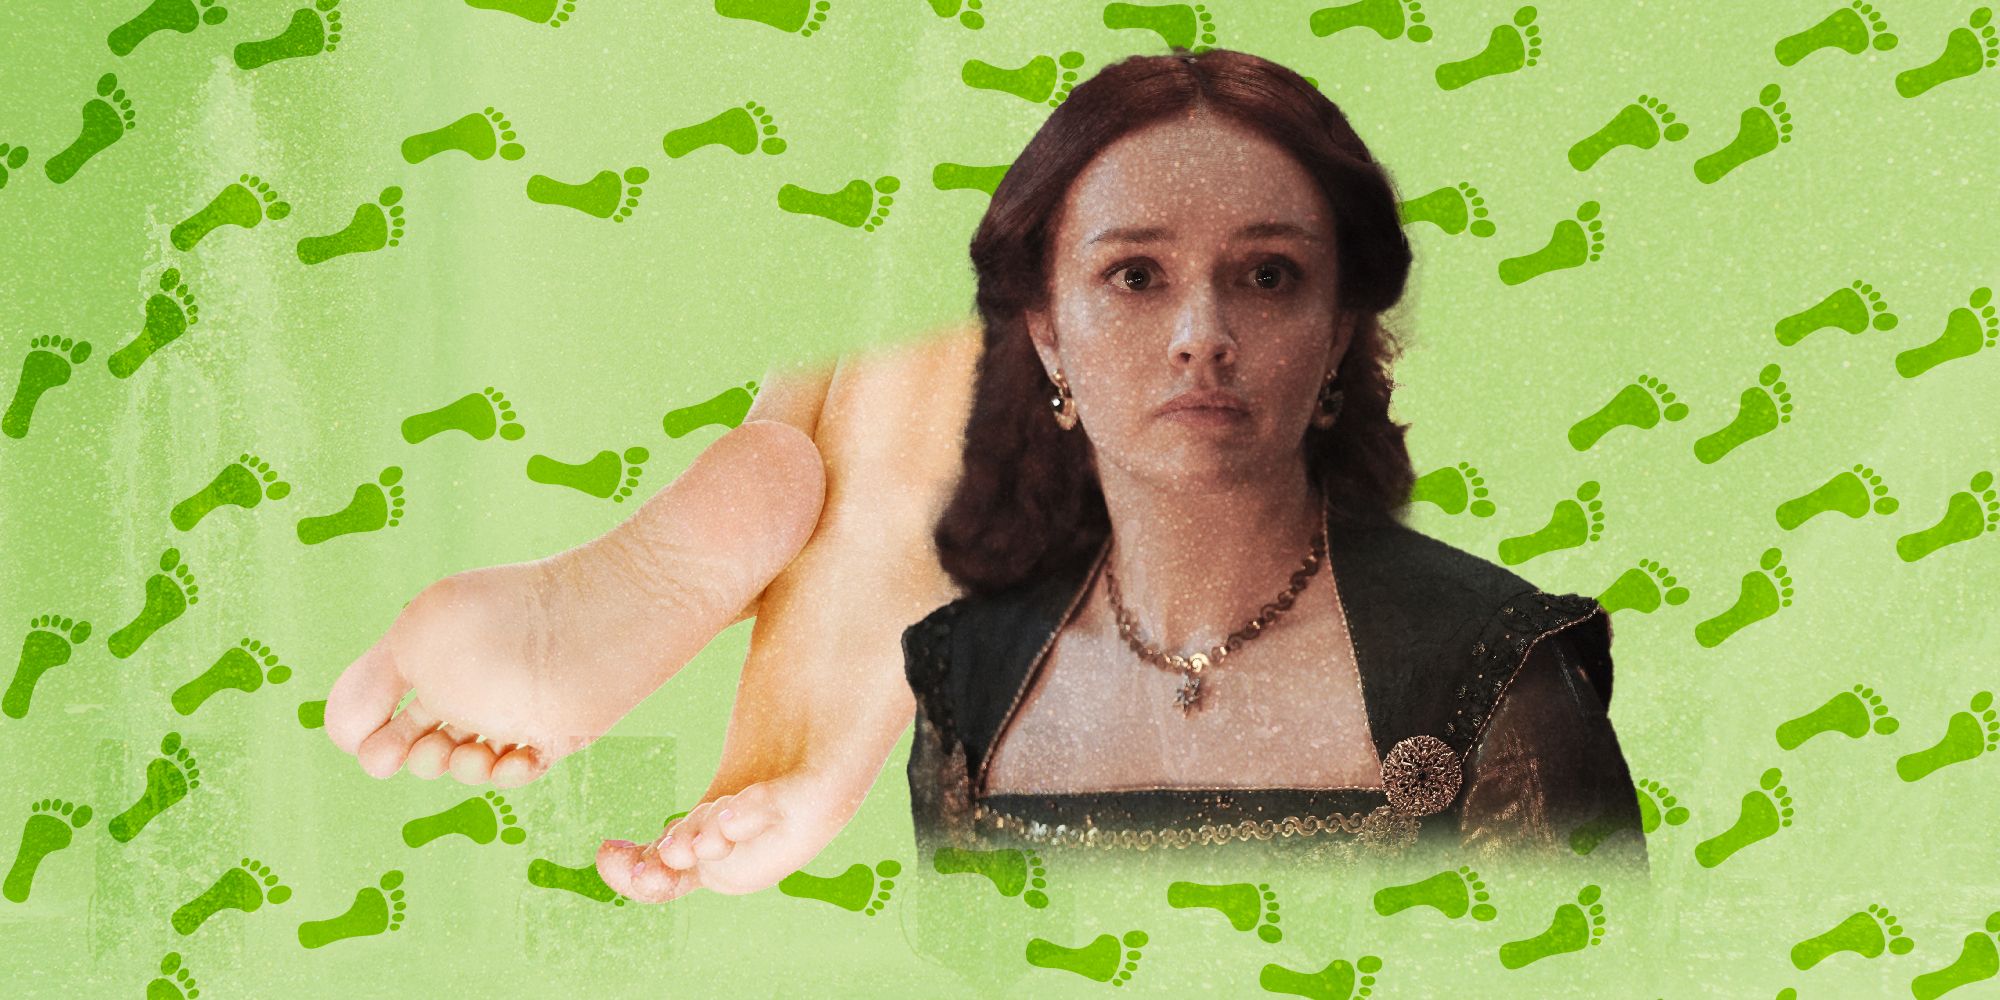 diana weeks recommends olivia cooke feet pic